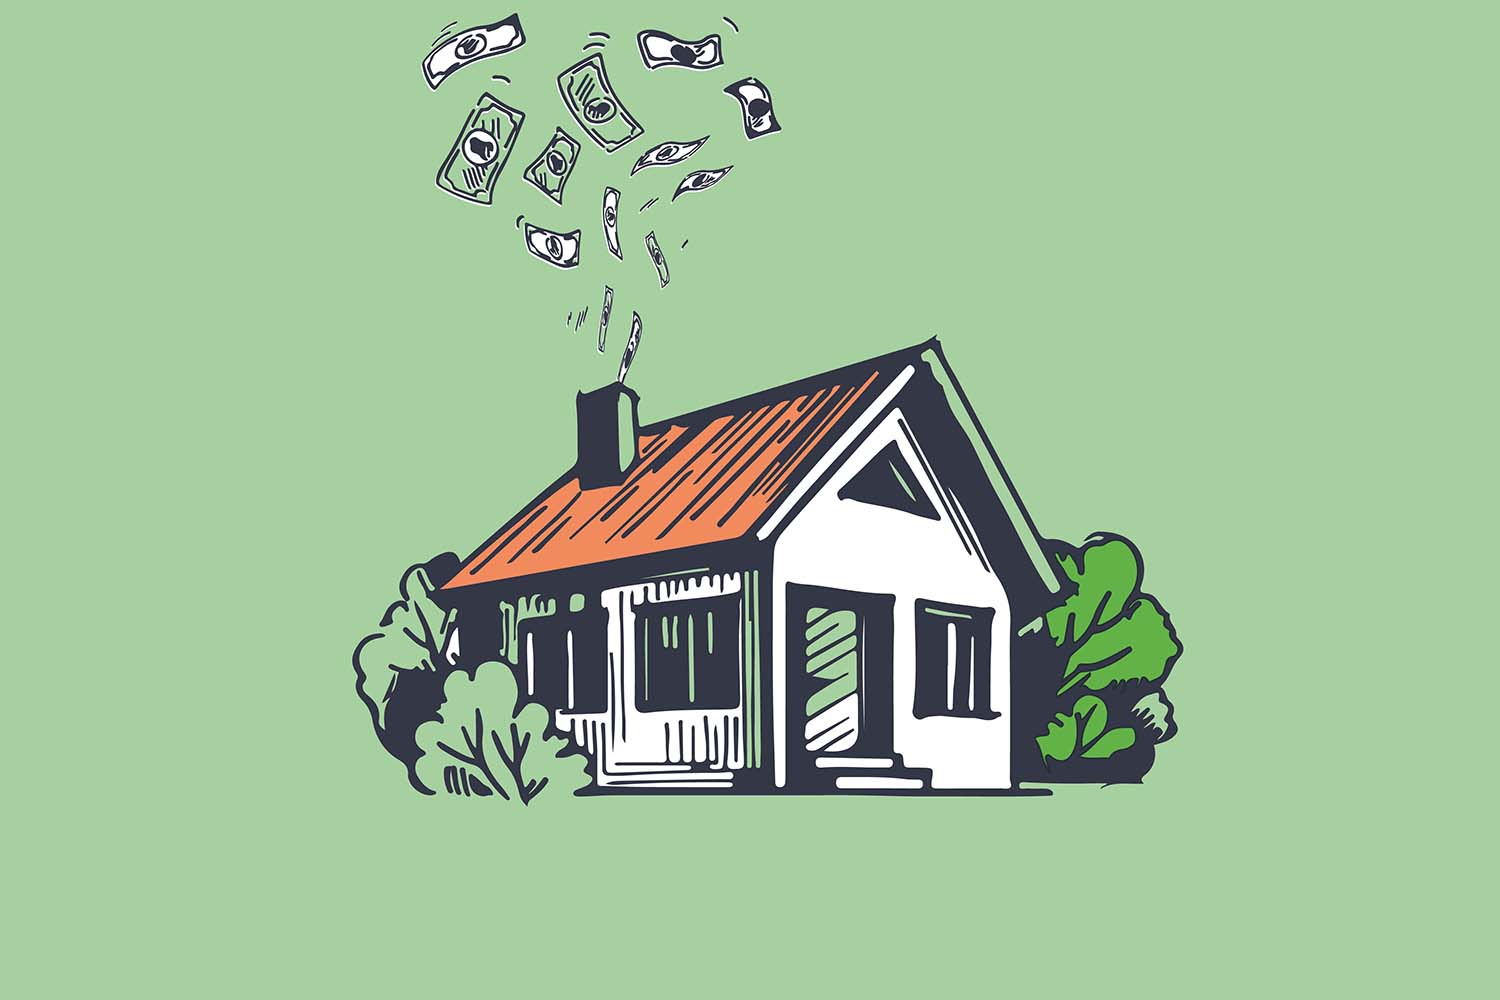 5 ways to invest in real estate to earn cashflow